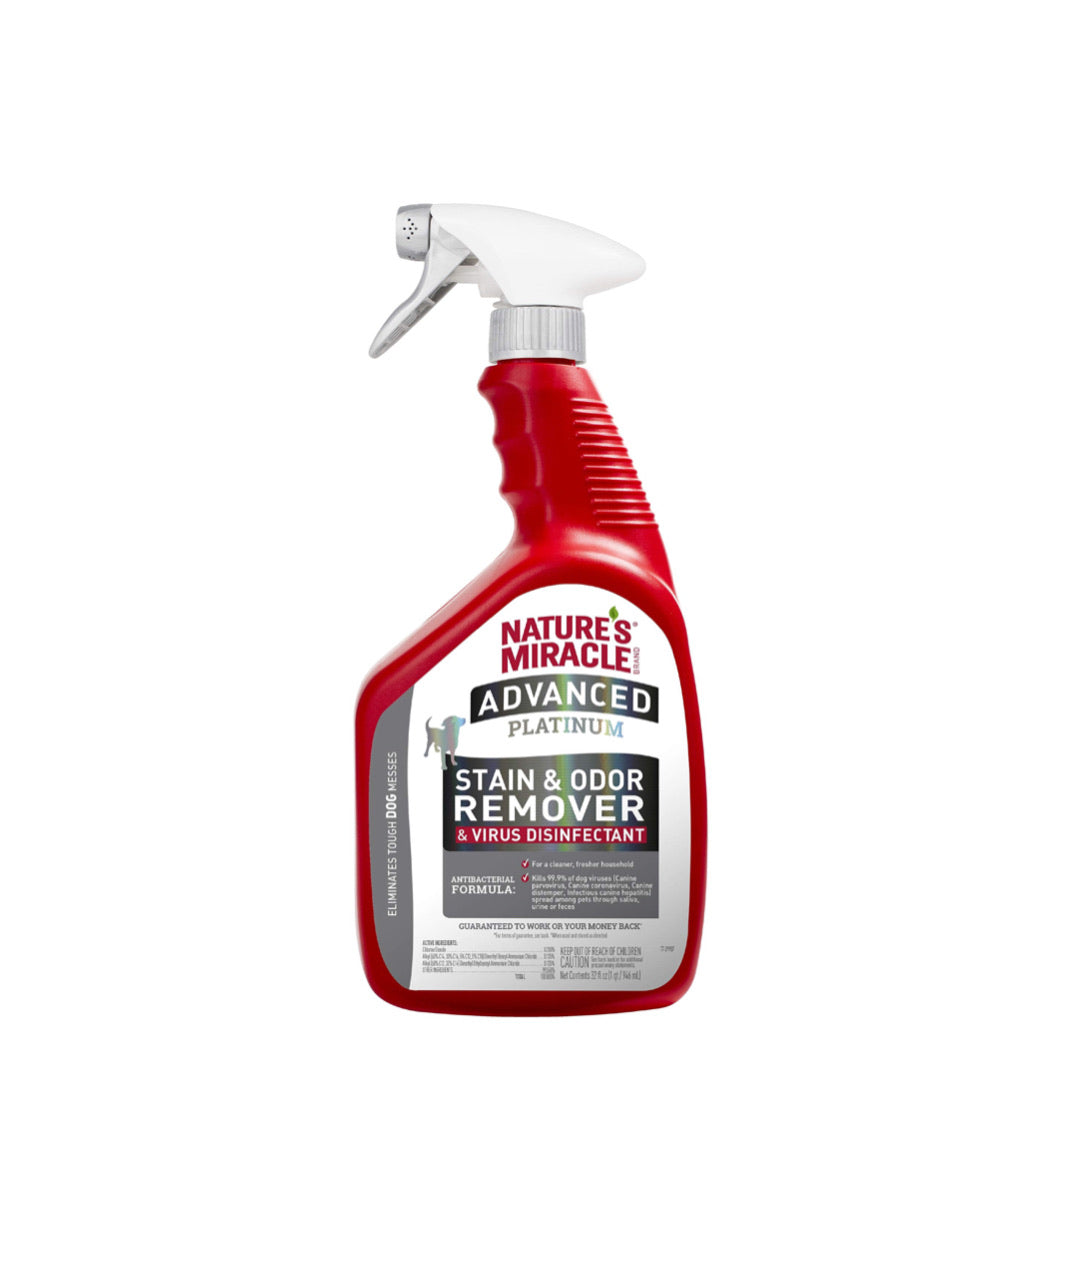 Nature’s Miracle Advanced Platinum Stain & Odor Remover (946ml)